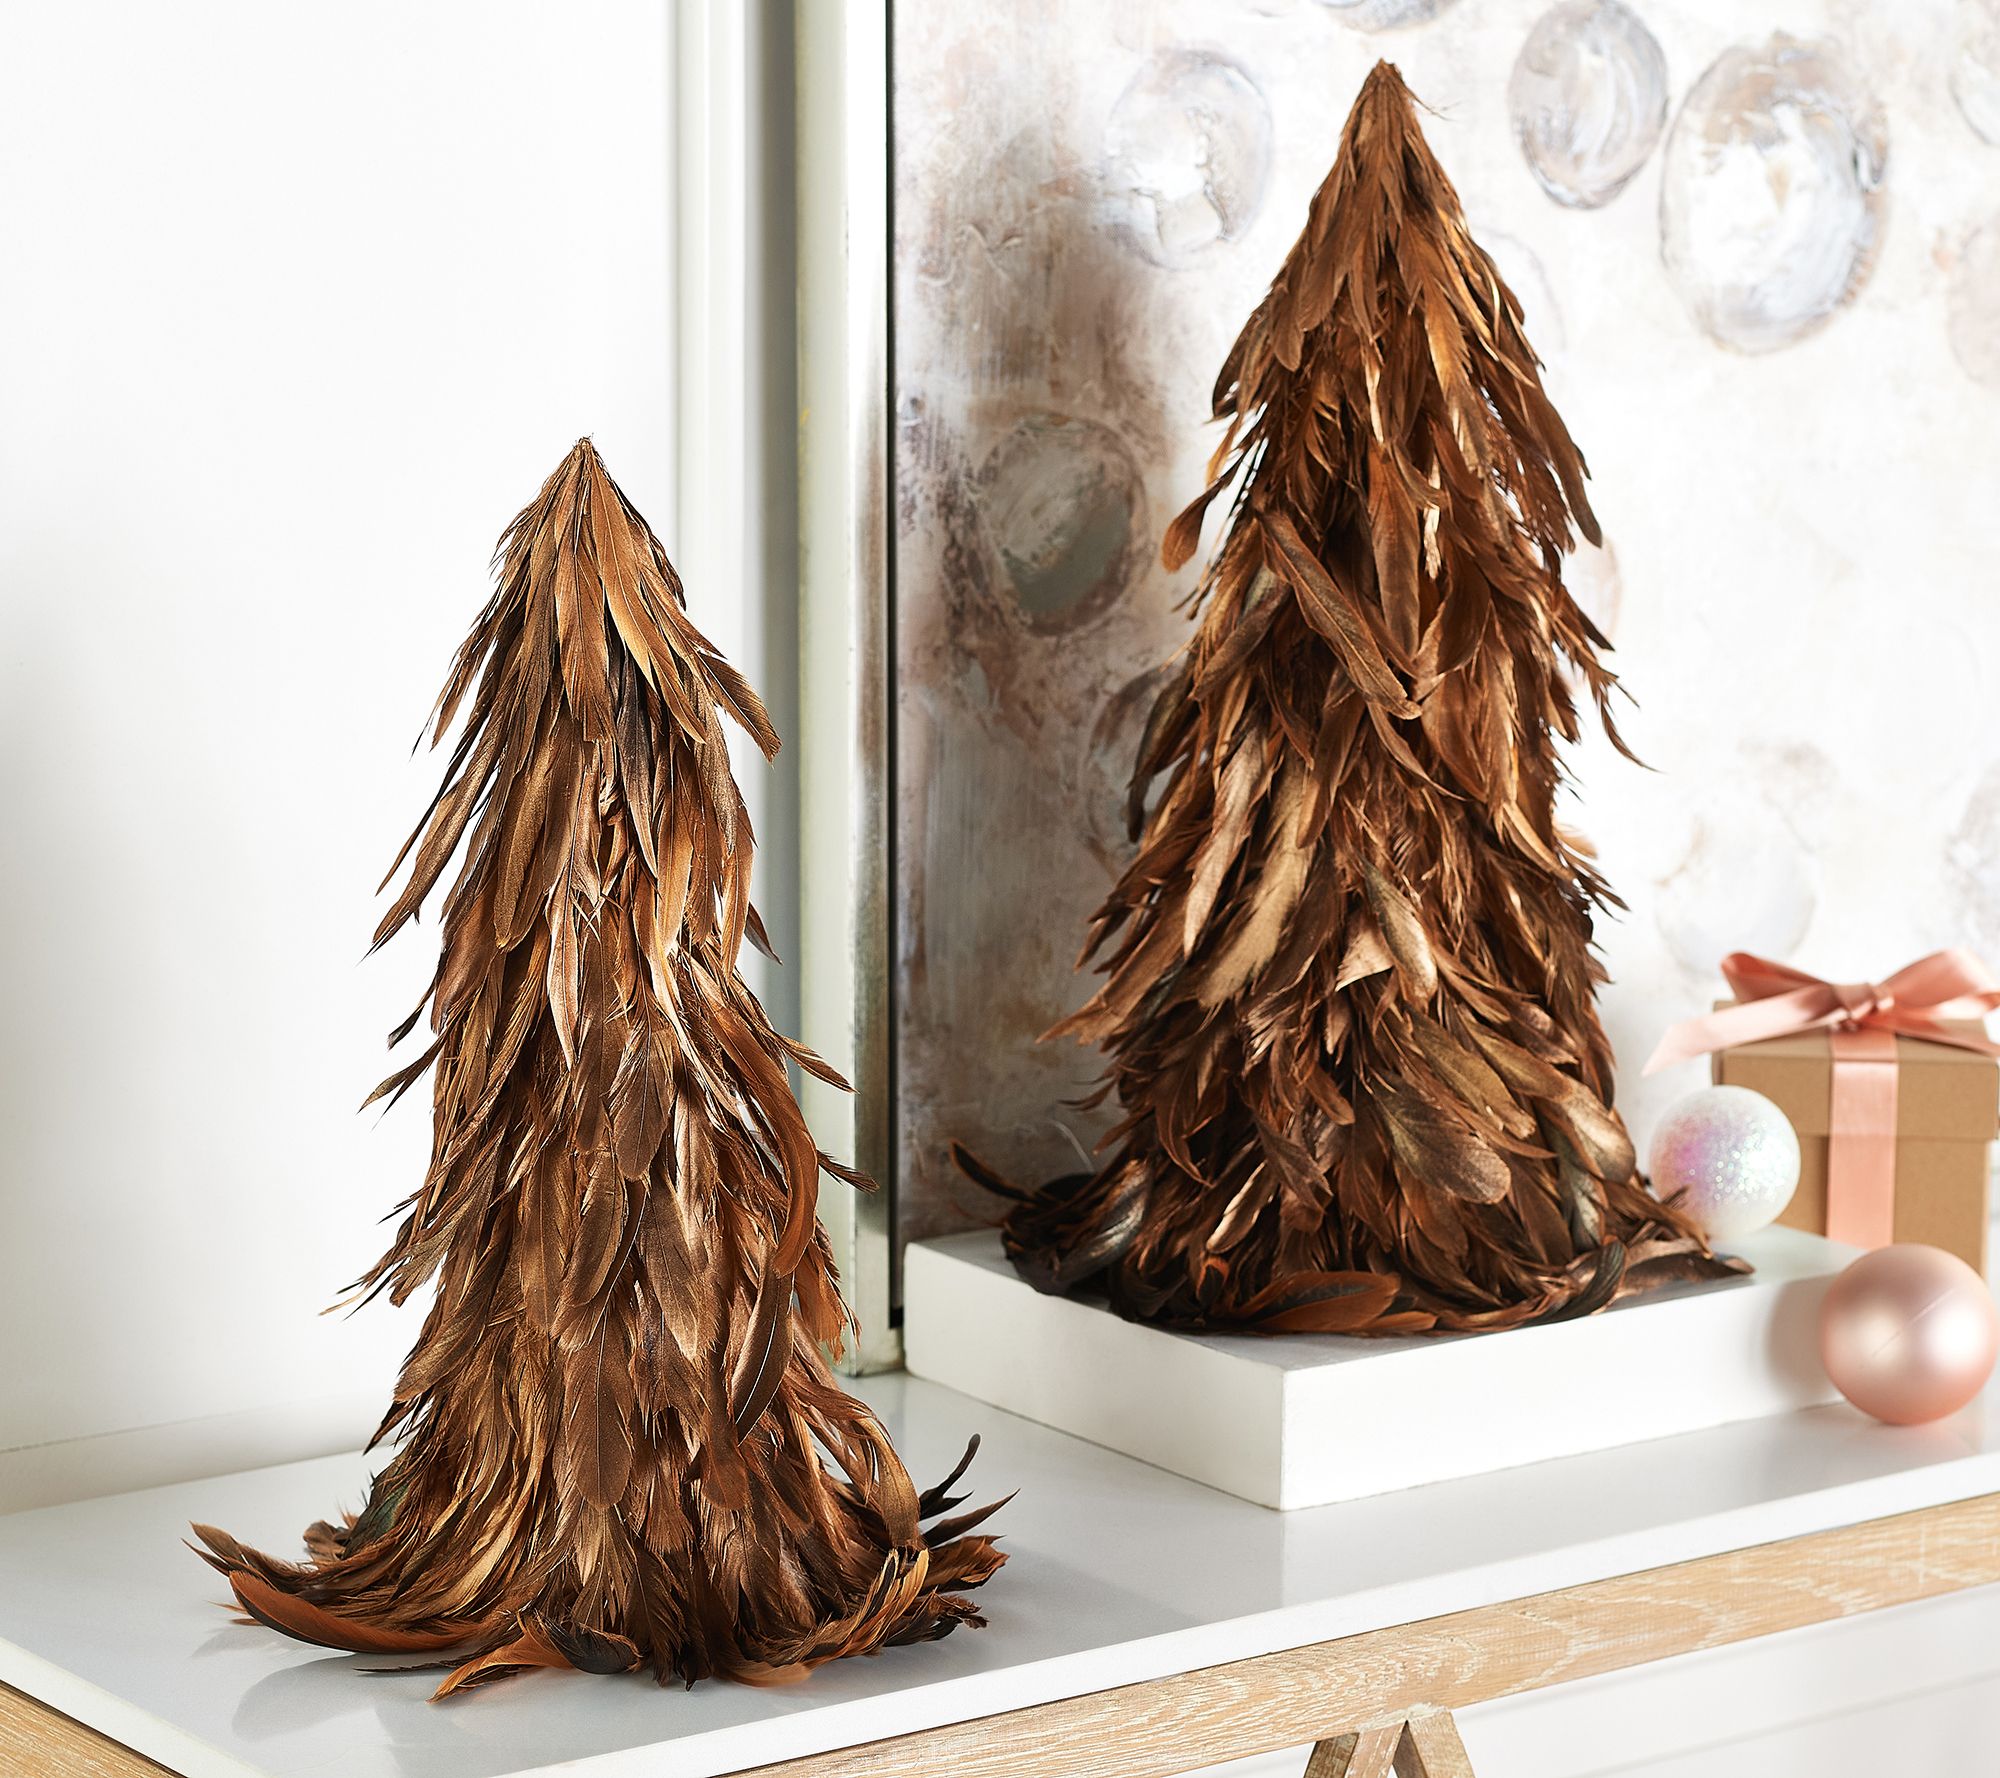 Simply Stunning S/2 Metallic Feather Trees by Janine Graff 